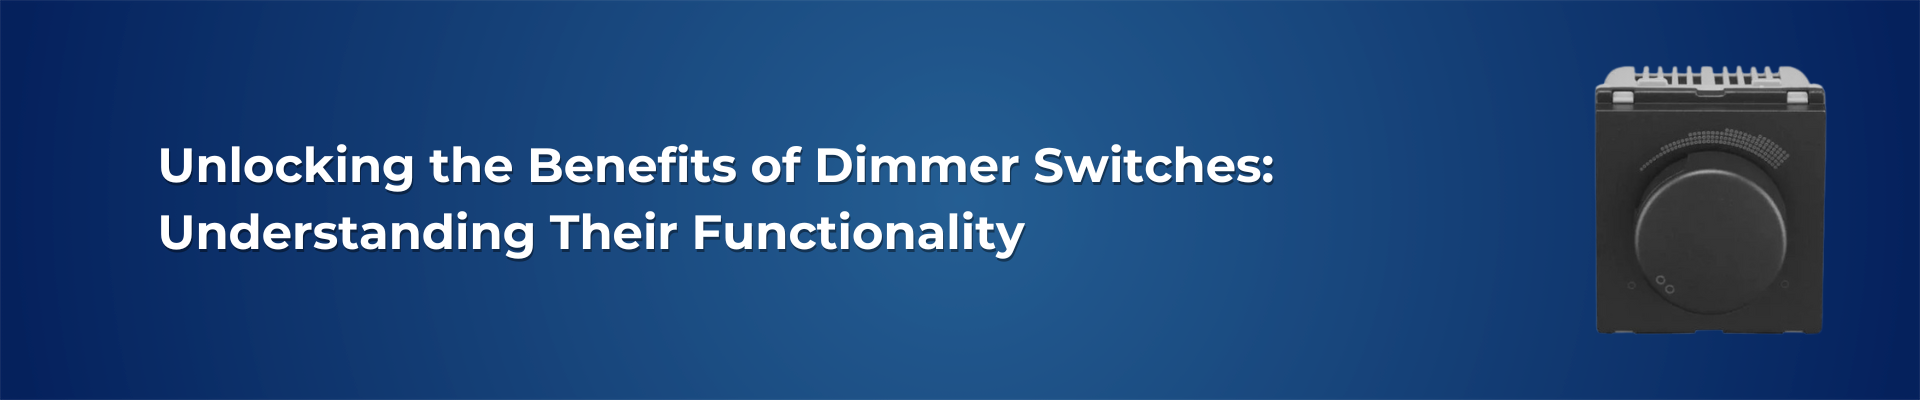 Unlocking the Benefits of Dimmer Switches